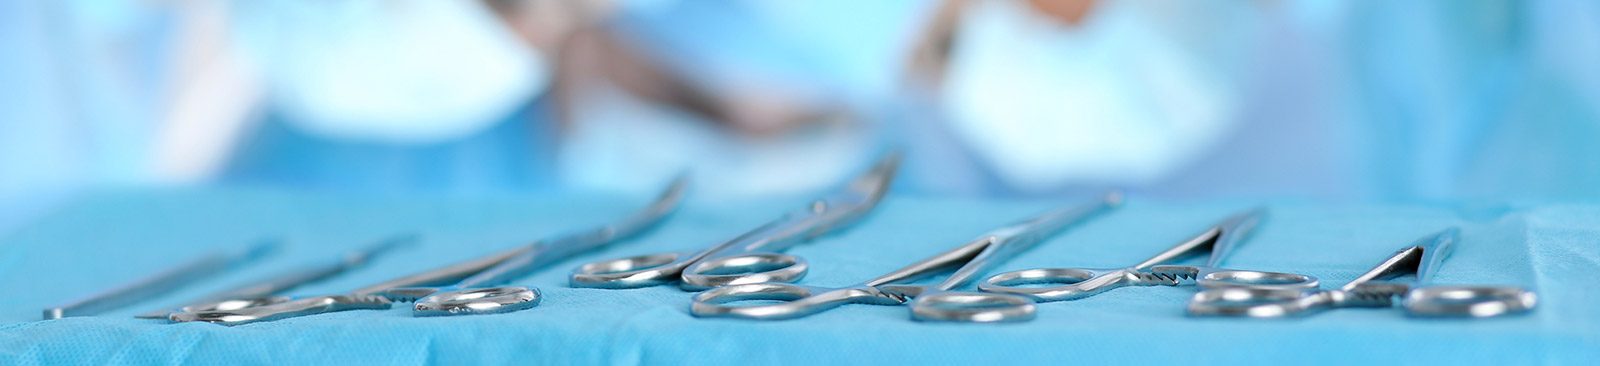 Do you know the most common surgical errors in the United States?